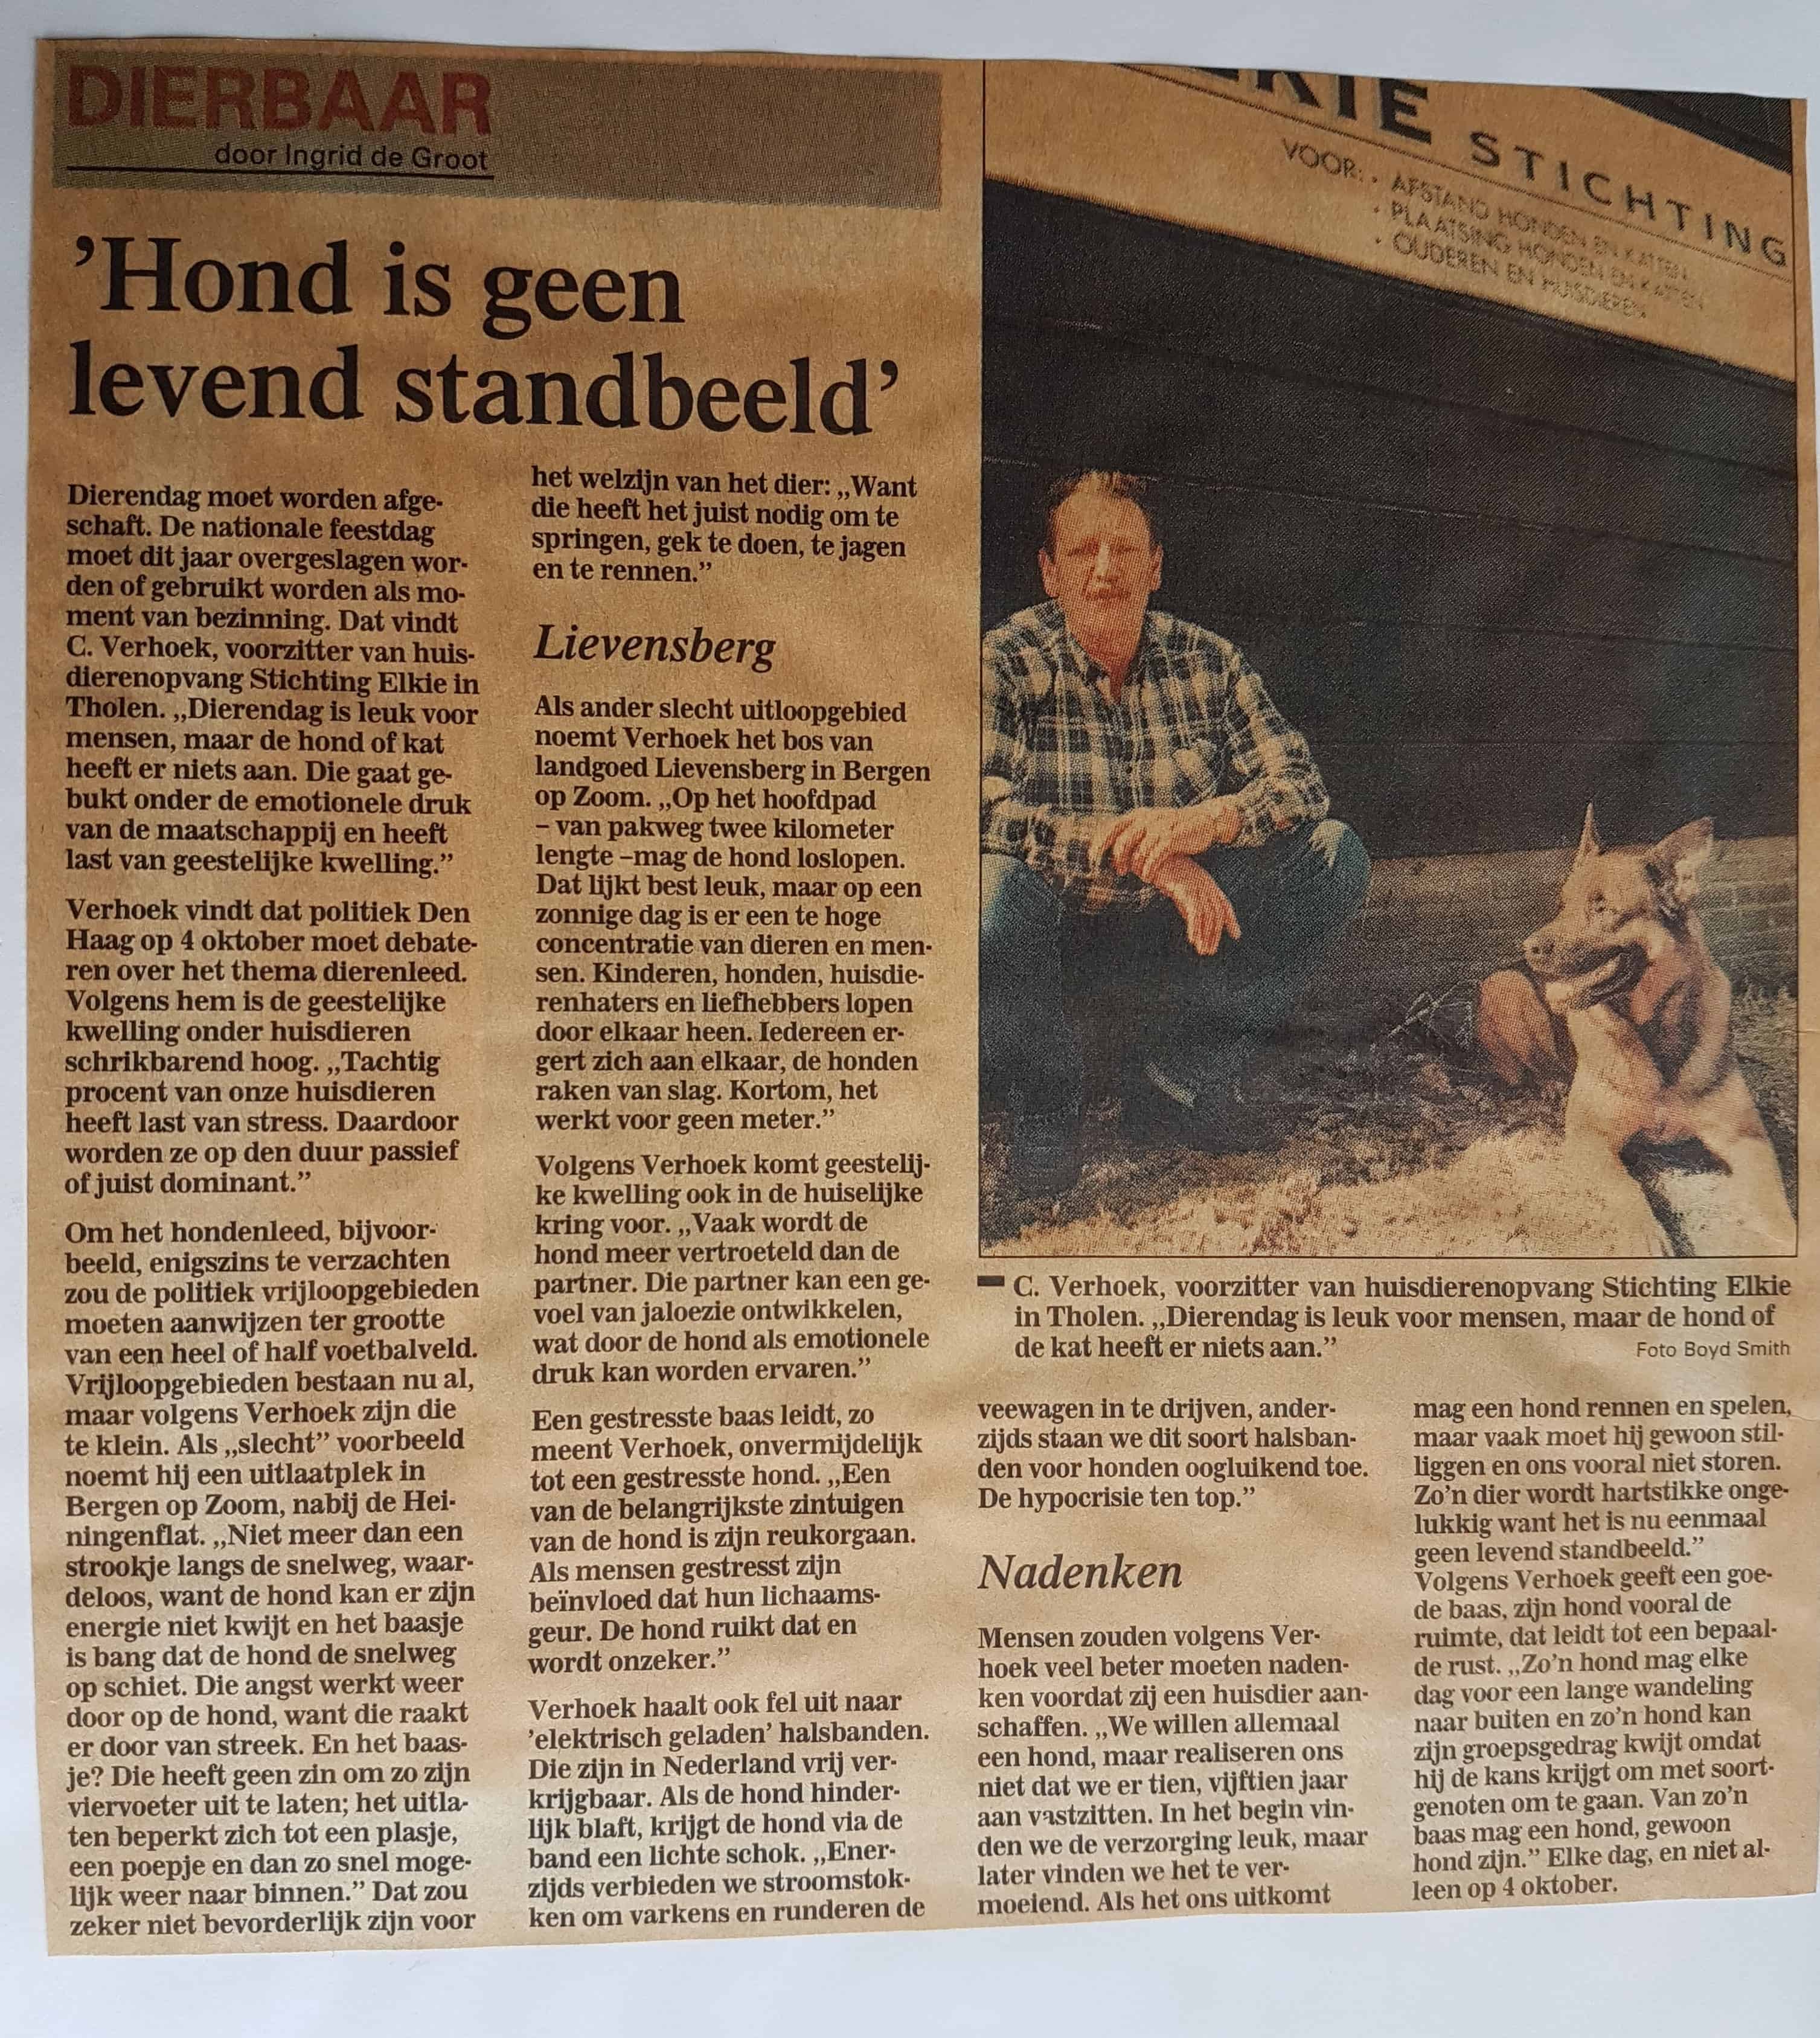 1995 of later hond is geen levend standbeeld